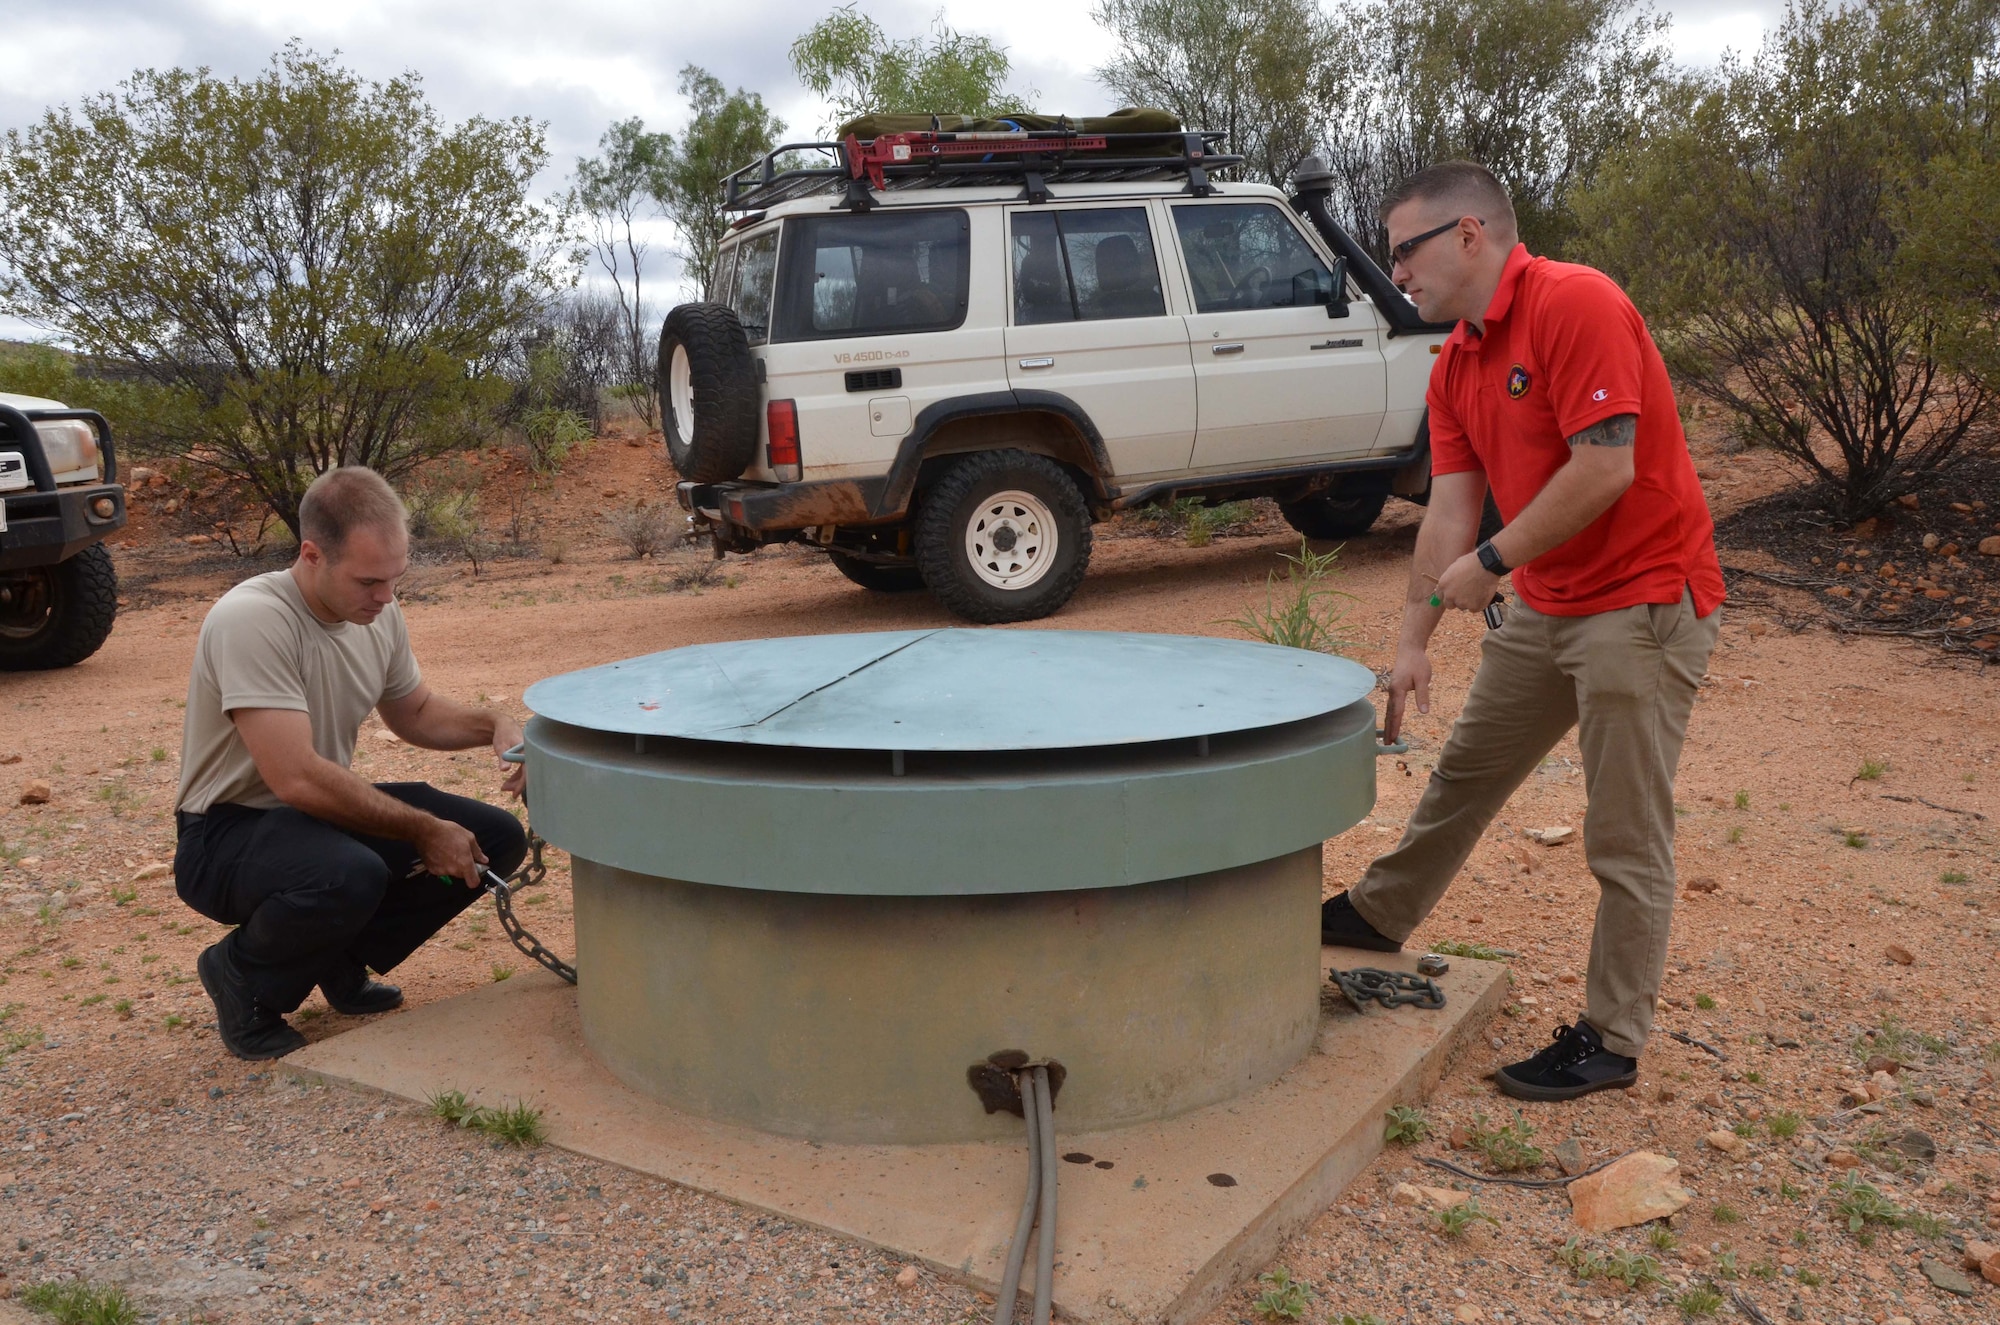 Airmen stationed at Detachment 421, Alice Springs, Australia, conduct maintenance at one of their seismic arrays in support of the Air Force Technical Applications Center’s nuclear treaty monitoring mission.  (U.S. Air Force photo by Susan A. Romano)

